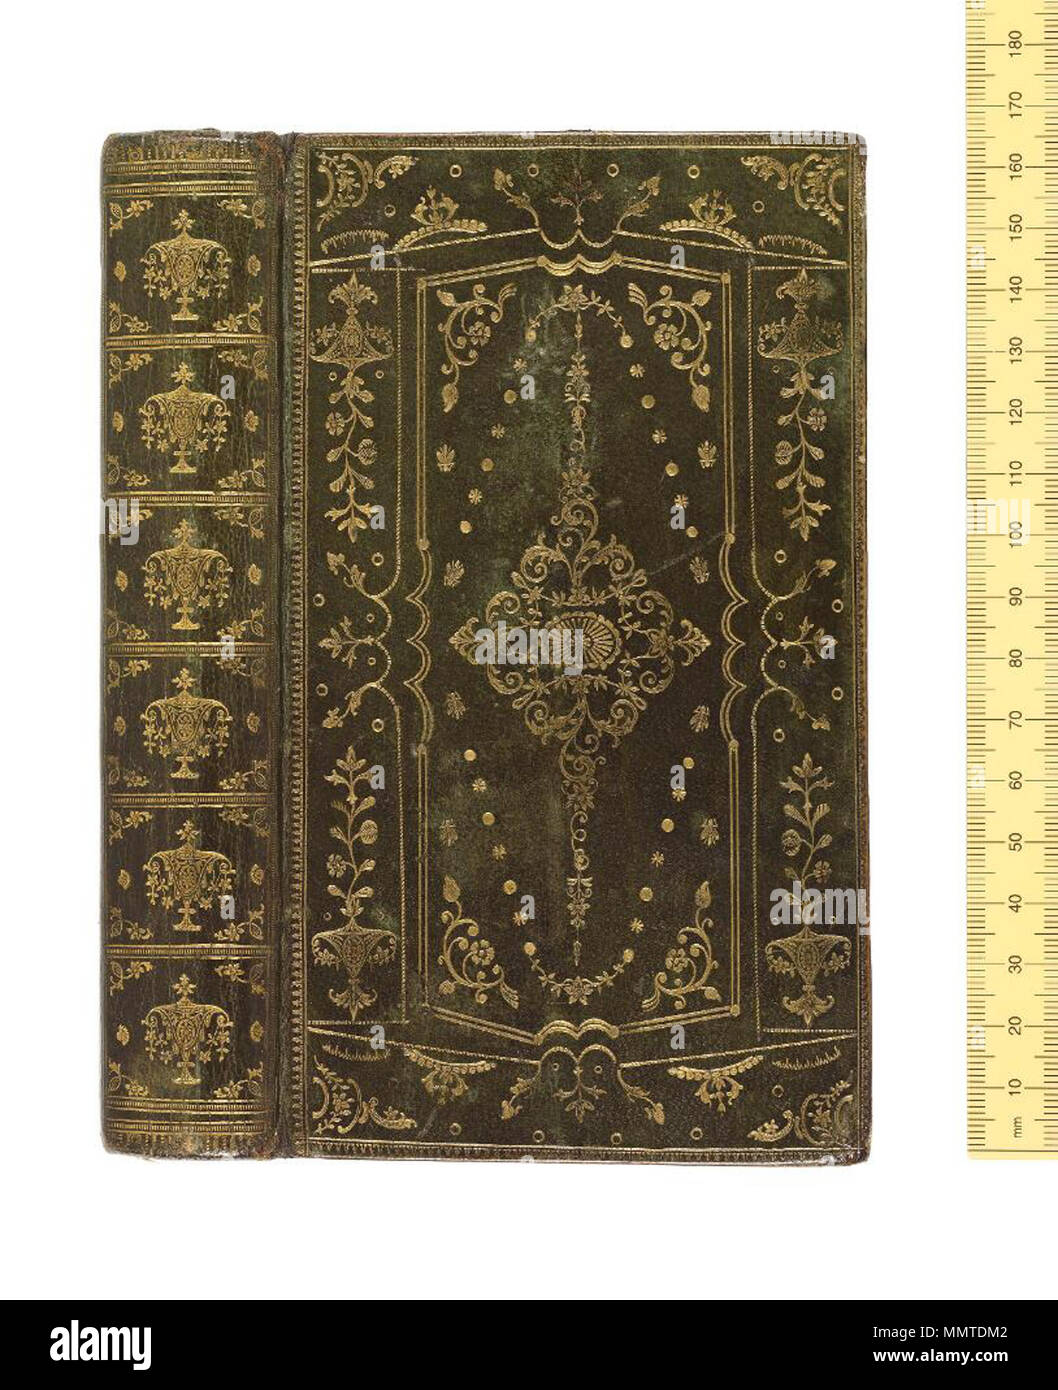 . Binding and box. English, mid 18th century. Goatskin with allover gilt-tooled design. The elaborate binding has been provided with a protective box, which has been decorated to an equally elaborate degree, complete with silver clasp.  The book of Common Prayer. 1762. Bodleian Libraries, The Book of Common Prayer Stock Photo